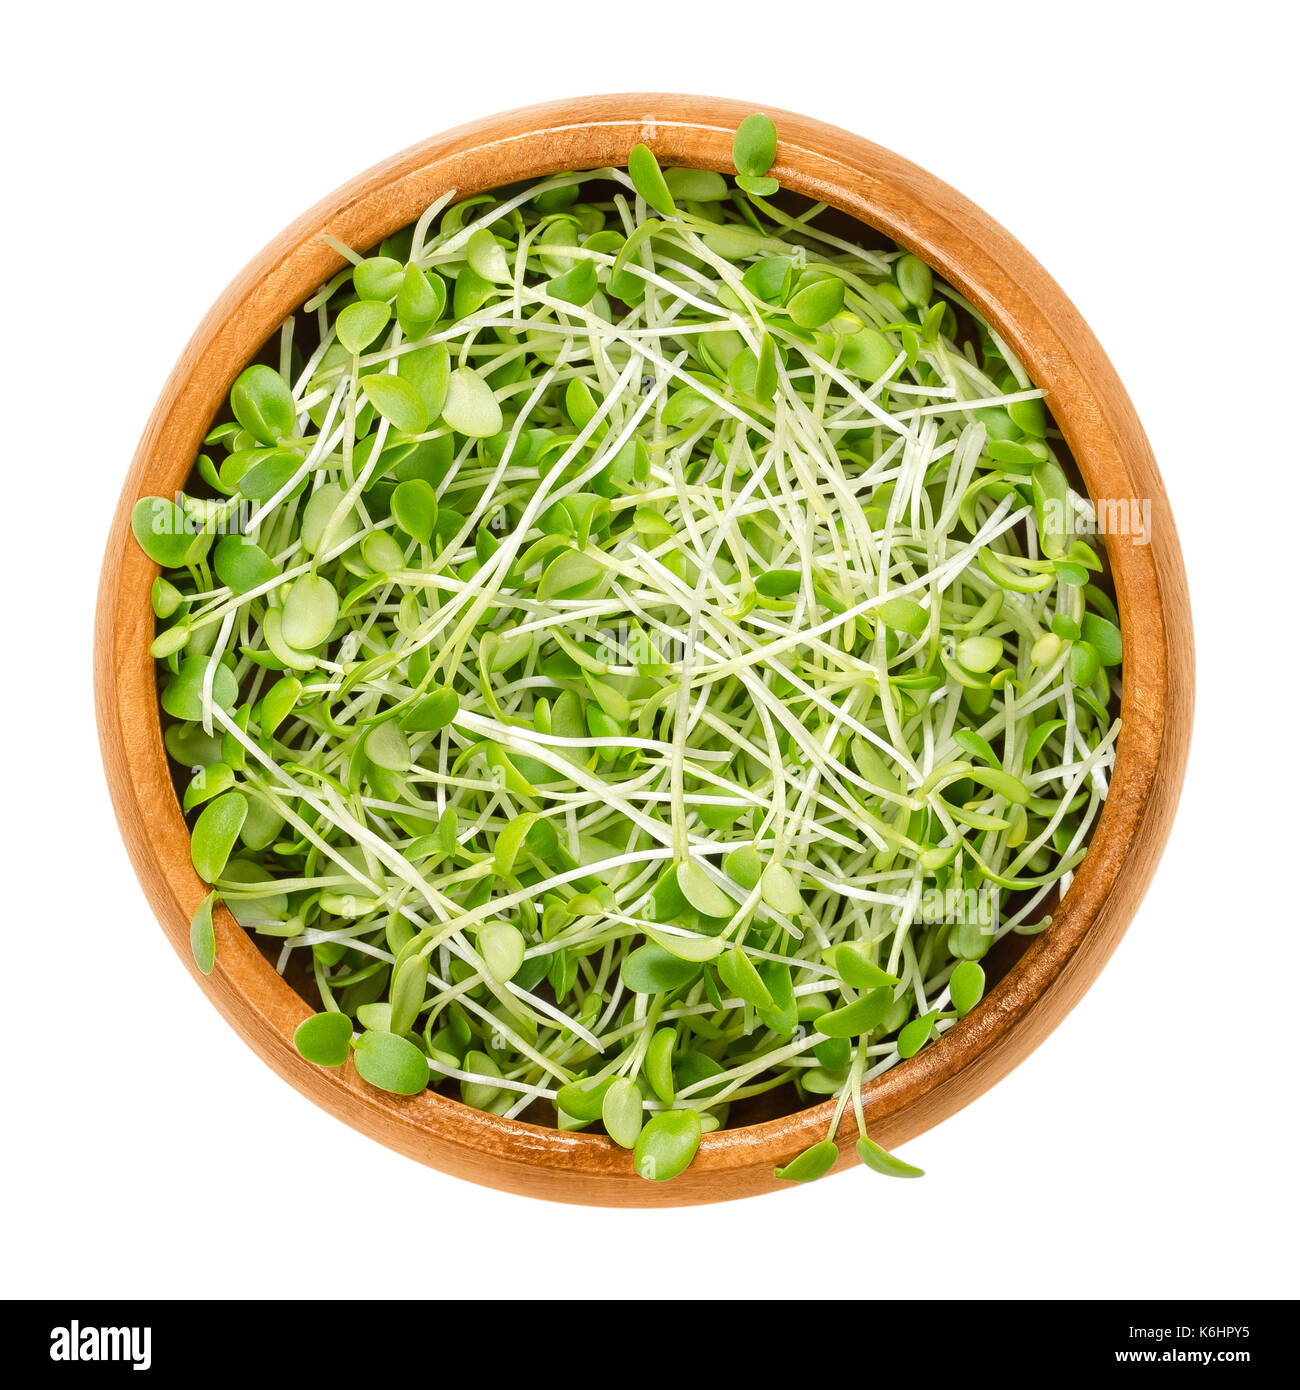 Crimson clover microgreens in wooden bowl. Cotyledons of Trifolium incarnatum also called Italian clover. Young plants, seedlings, sprouts. Photo. Stock Photo